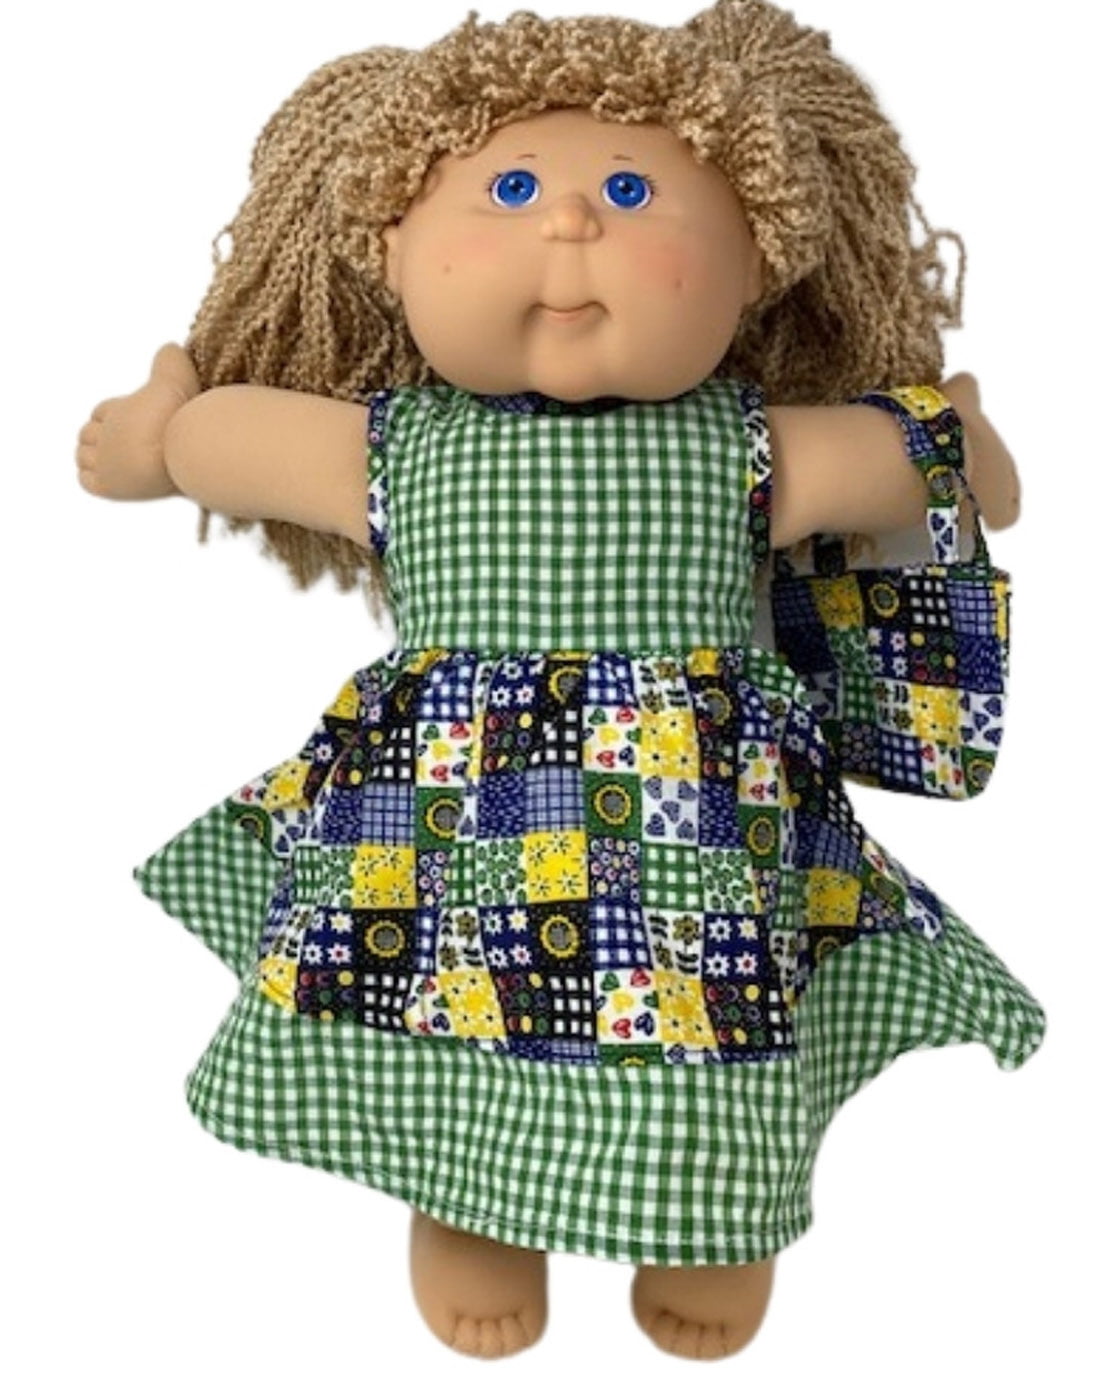 Cabbage Patch Doll Clothes Fits 12 inch Boy Green Check Pants